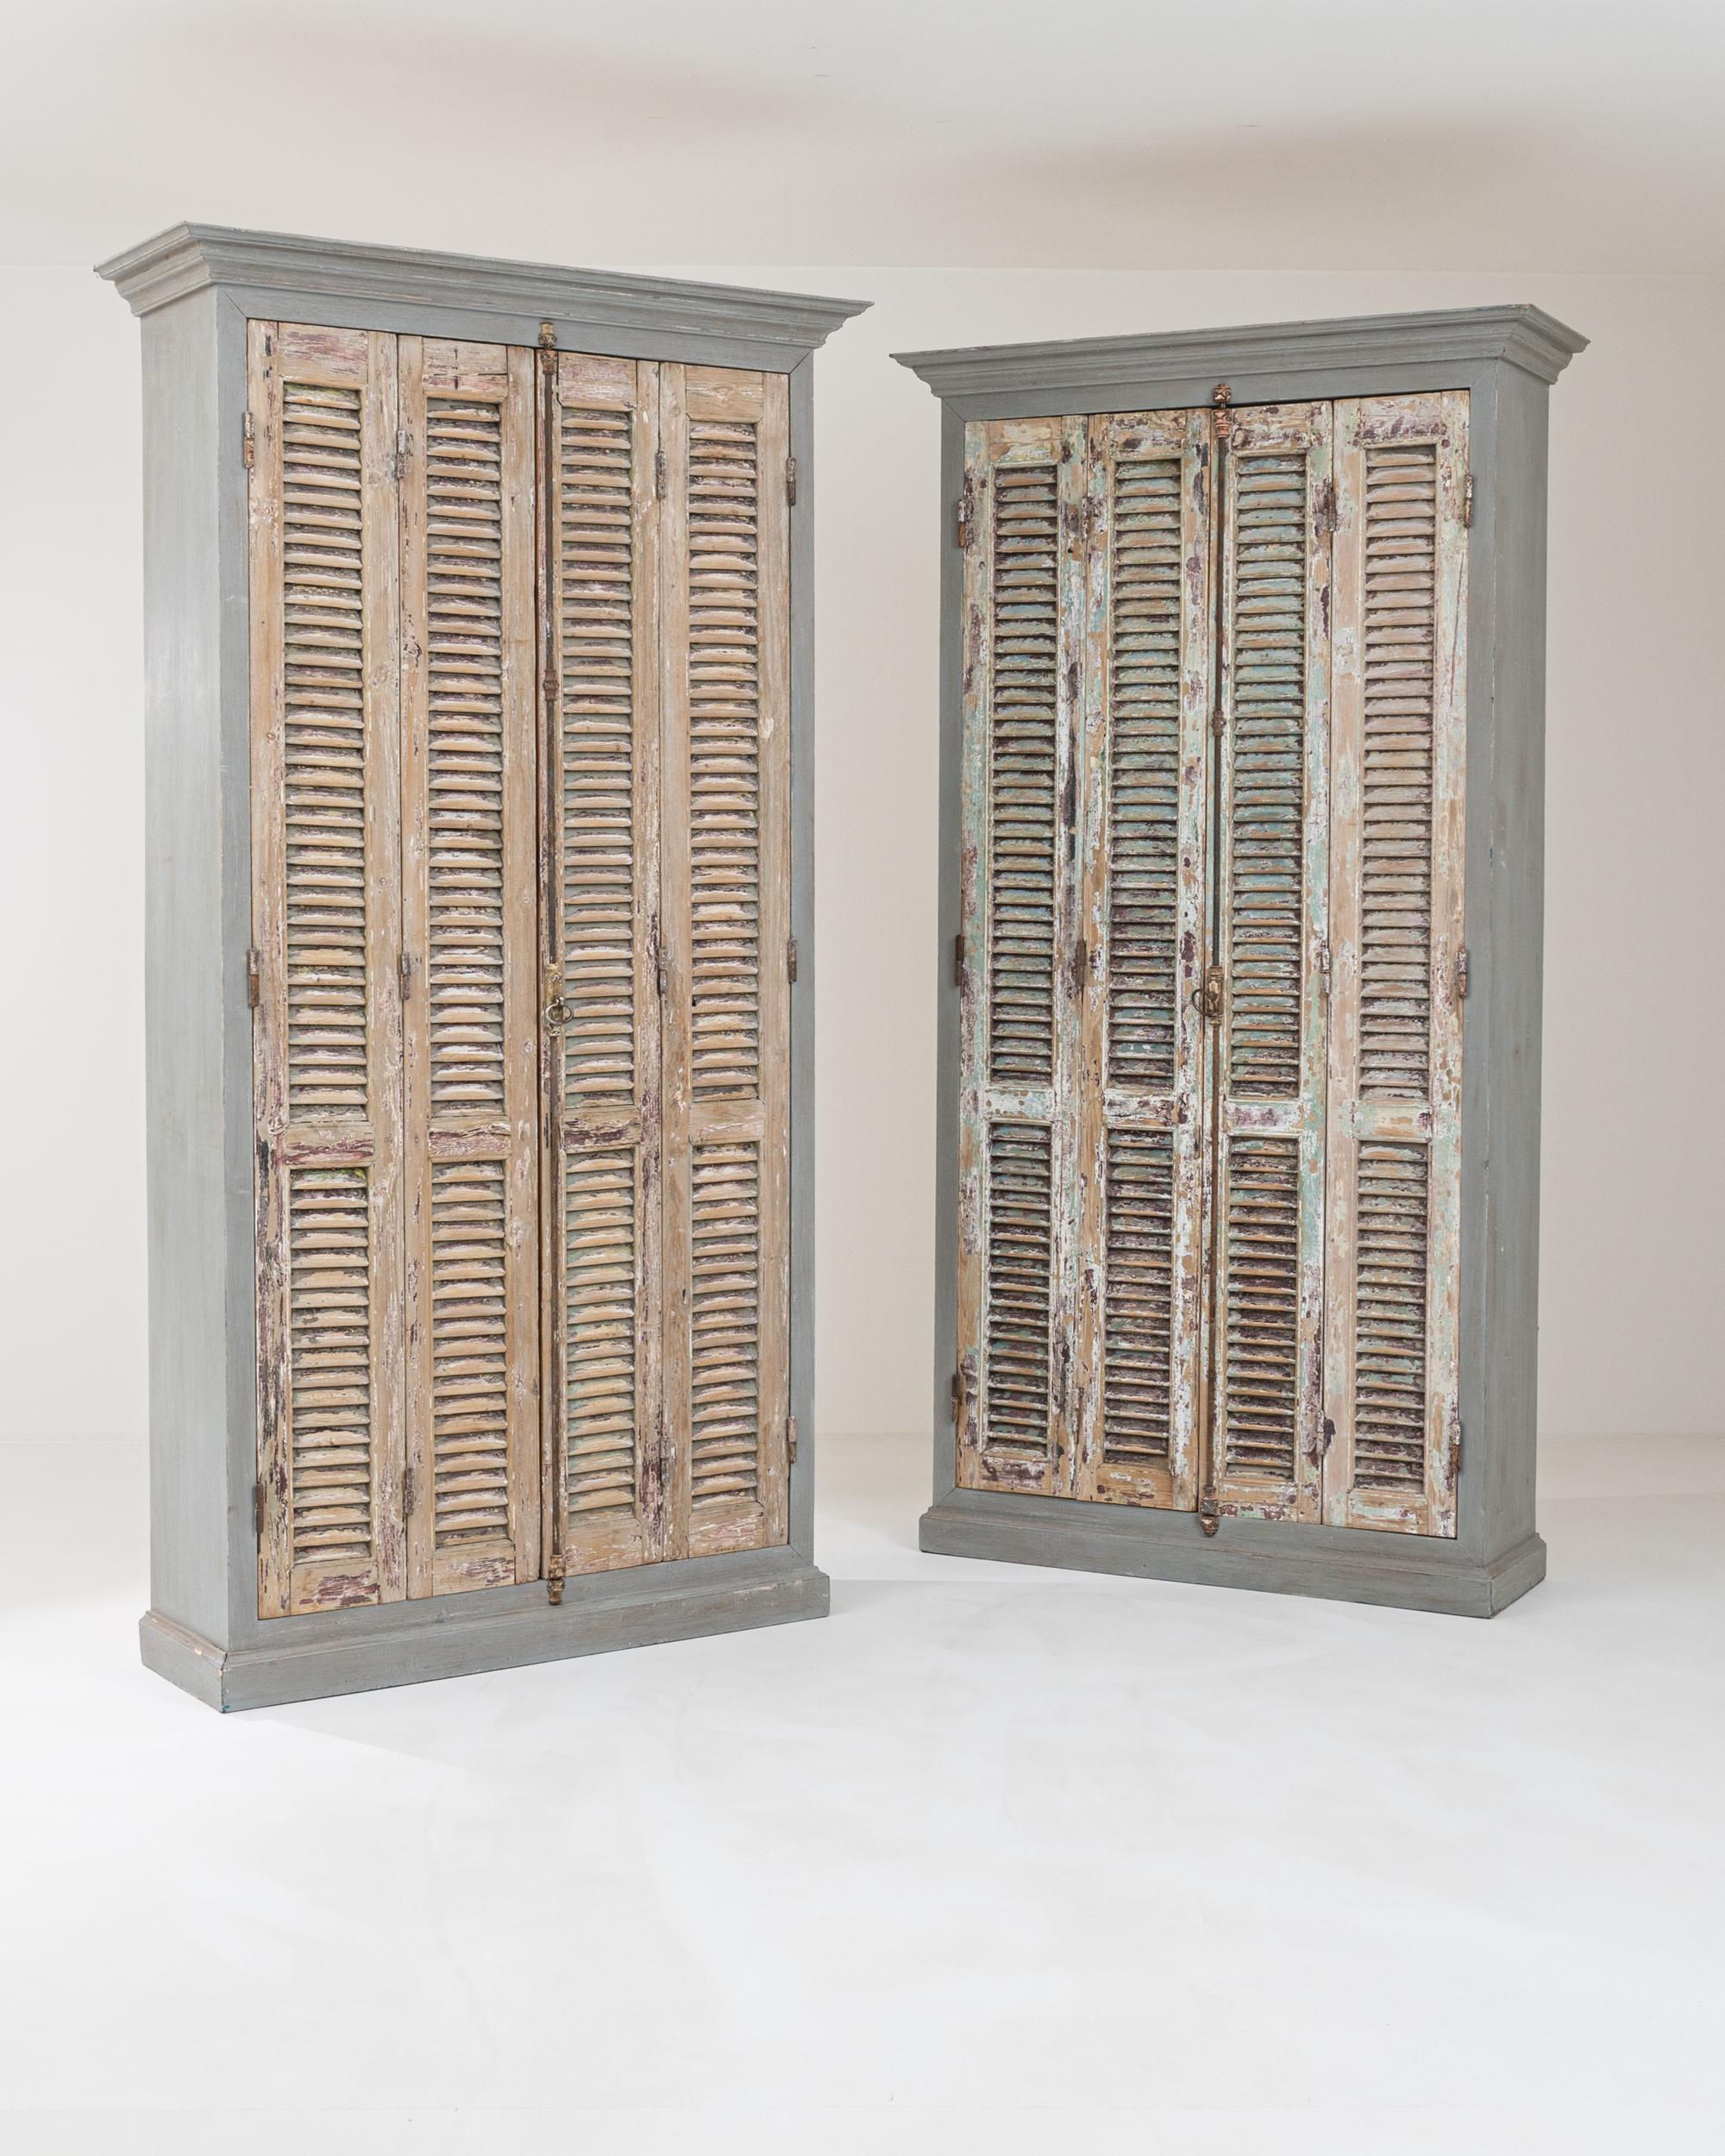 Composed from vintage architectural elements, this eclectic piece originates in Northern Africa, a land where East and West meet, this full-height cabinet is useful as a wardrobe, linen press, or all purpose storage. Constructed from large shutter